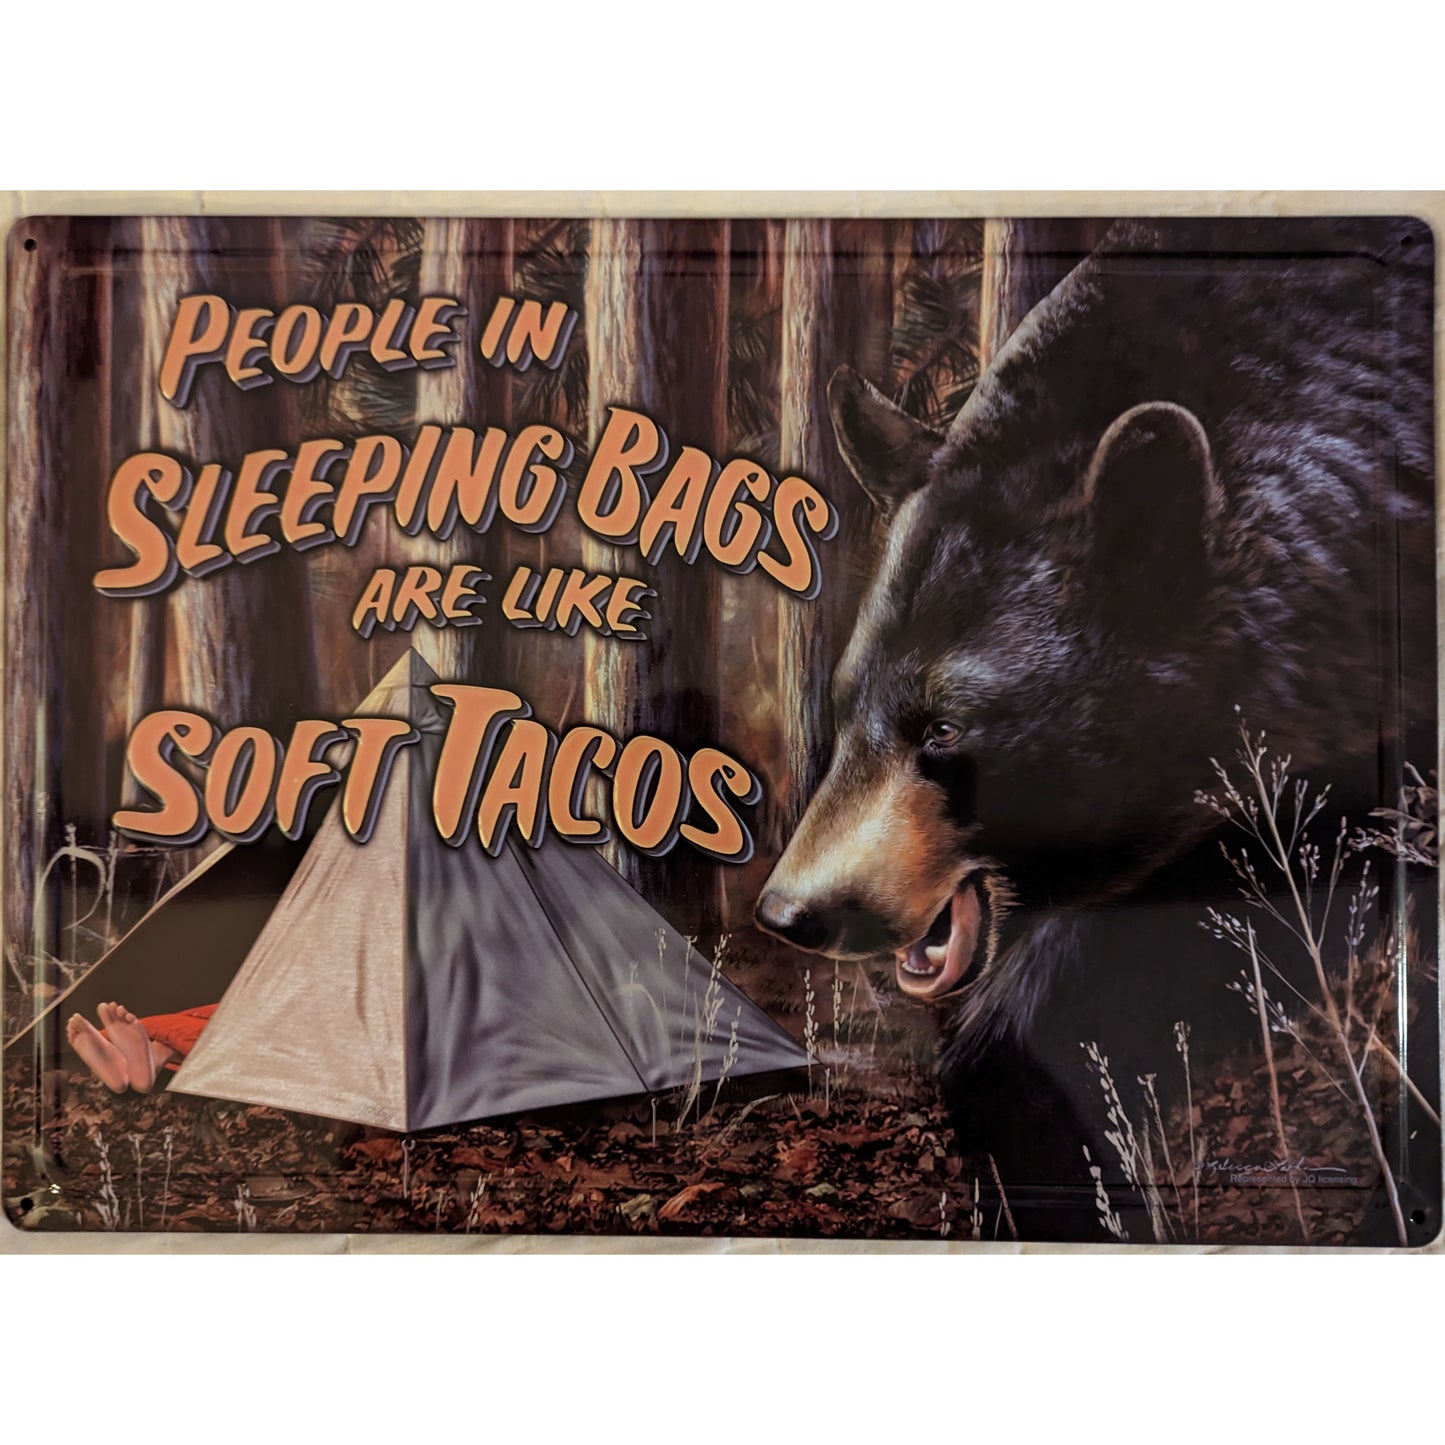 People in Sleeping Bags are like Soft Tacos - Bear Tin Sign 12"x17"